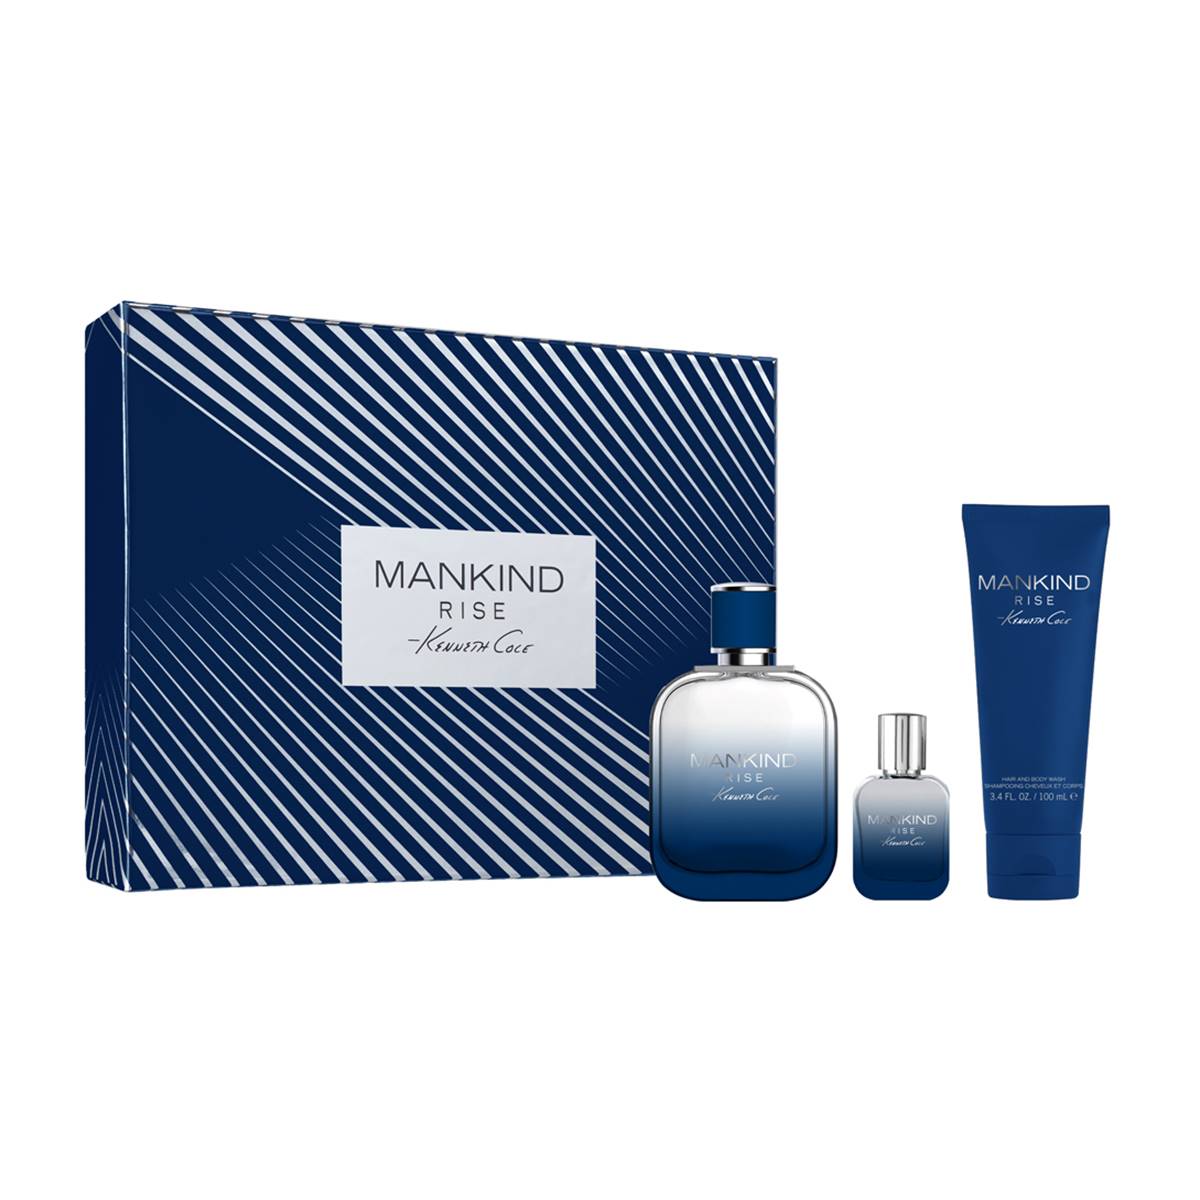 Kenneth Cole(R) Mankind Rise 3pc. Cologne Gift Set - Value $129.00